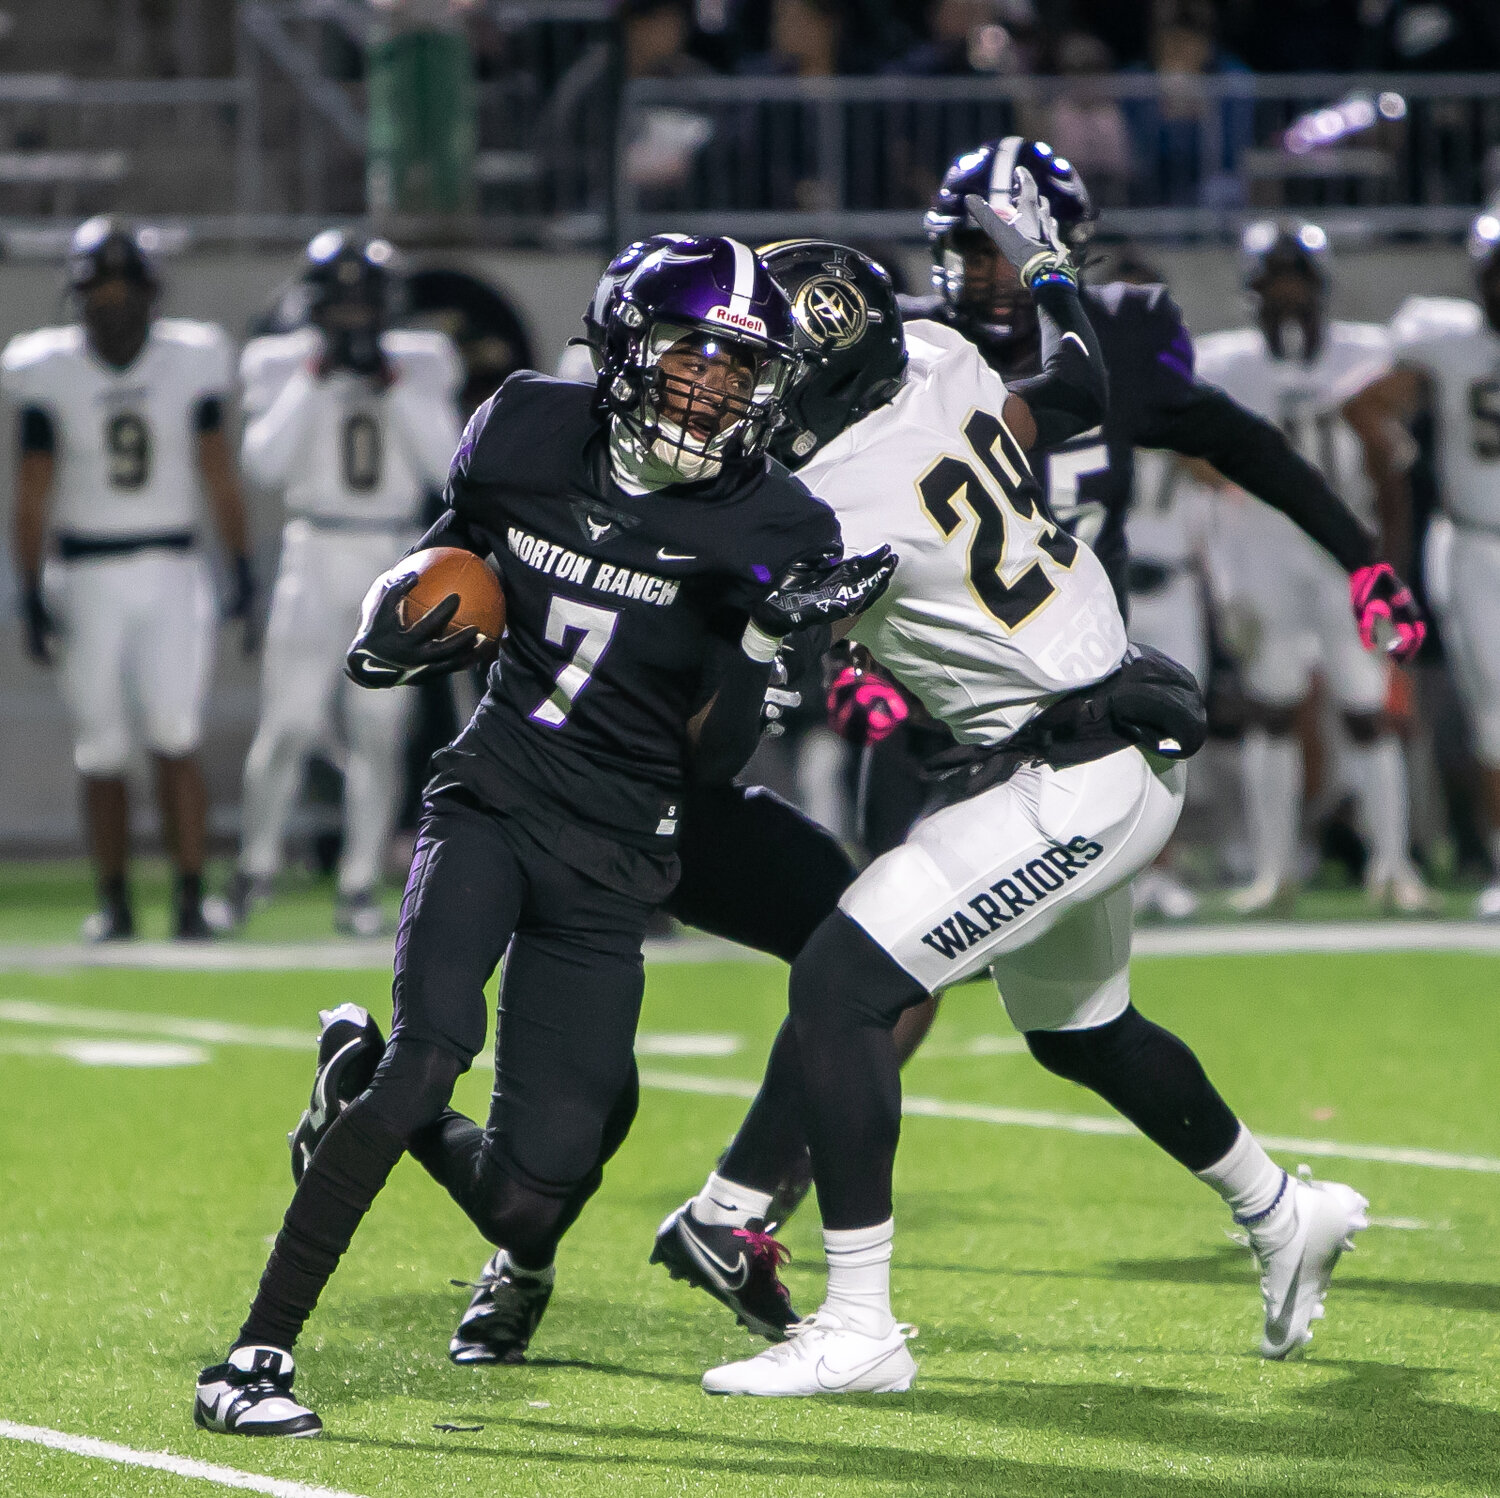 Markel McNeal tries to get past a defender during Thursday's game between Jordan and Morton Ranch at Legacy Stadium.